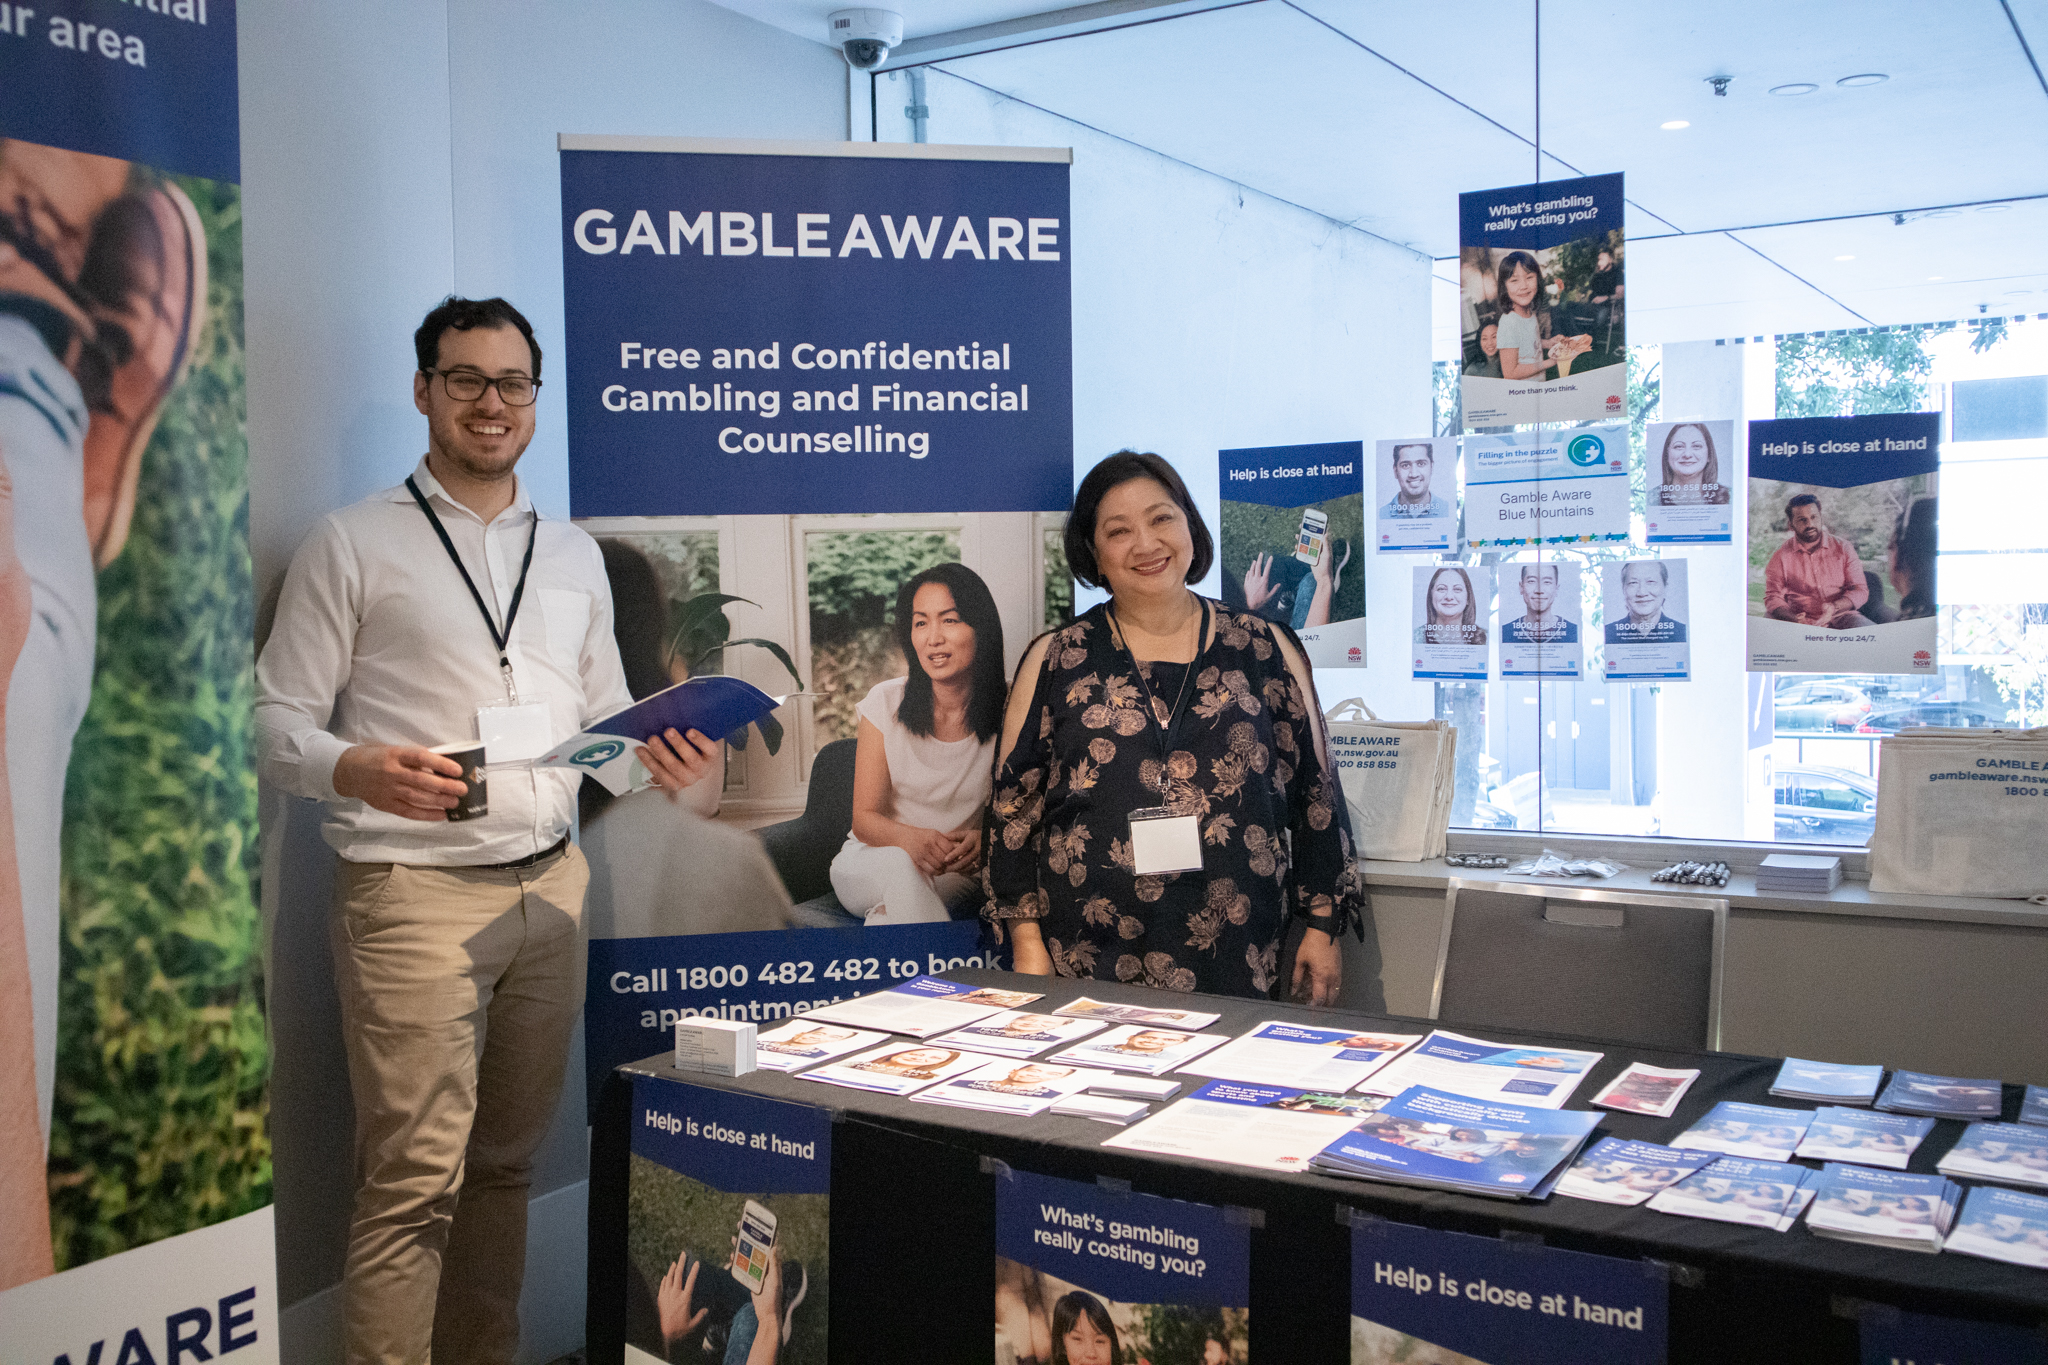 Two people standing at the Gamble Aware table, surrounded by pull-up banners, posters and brochures.